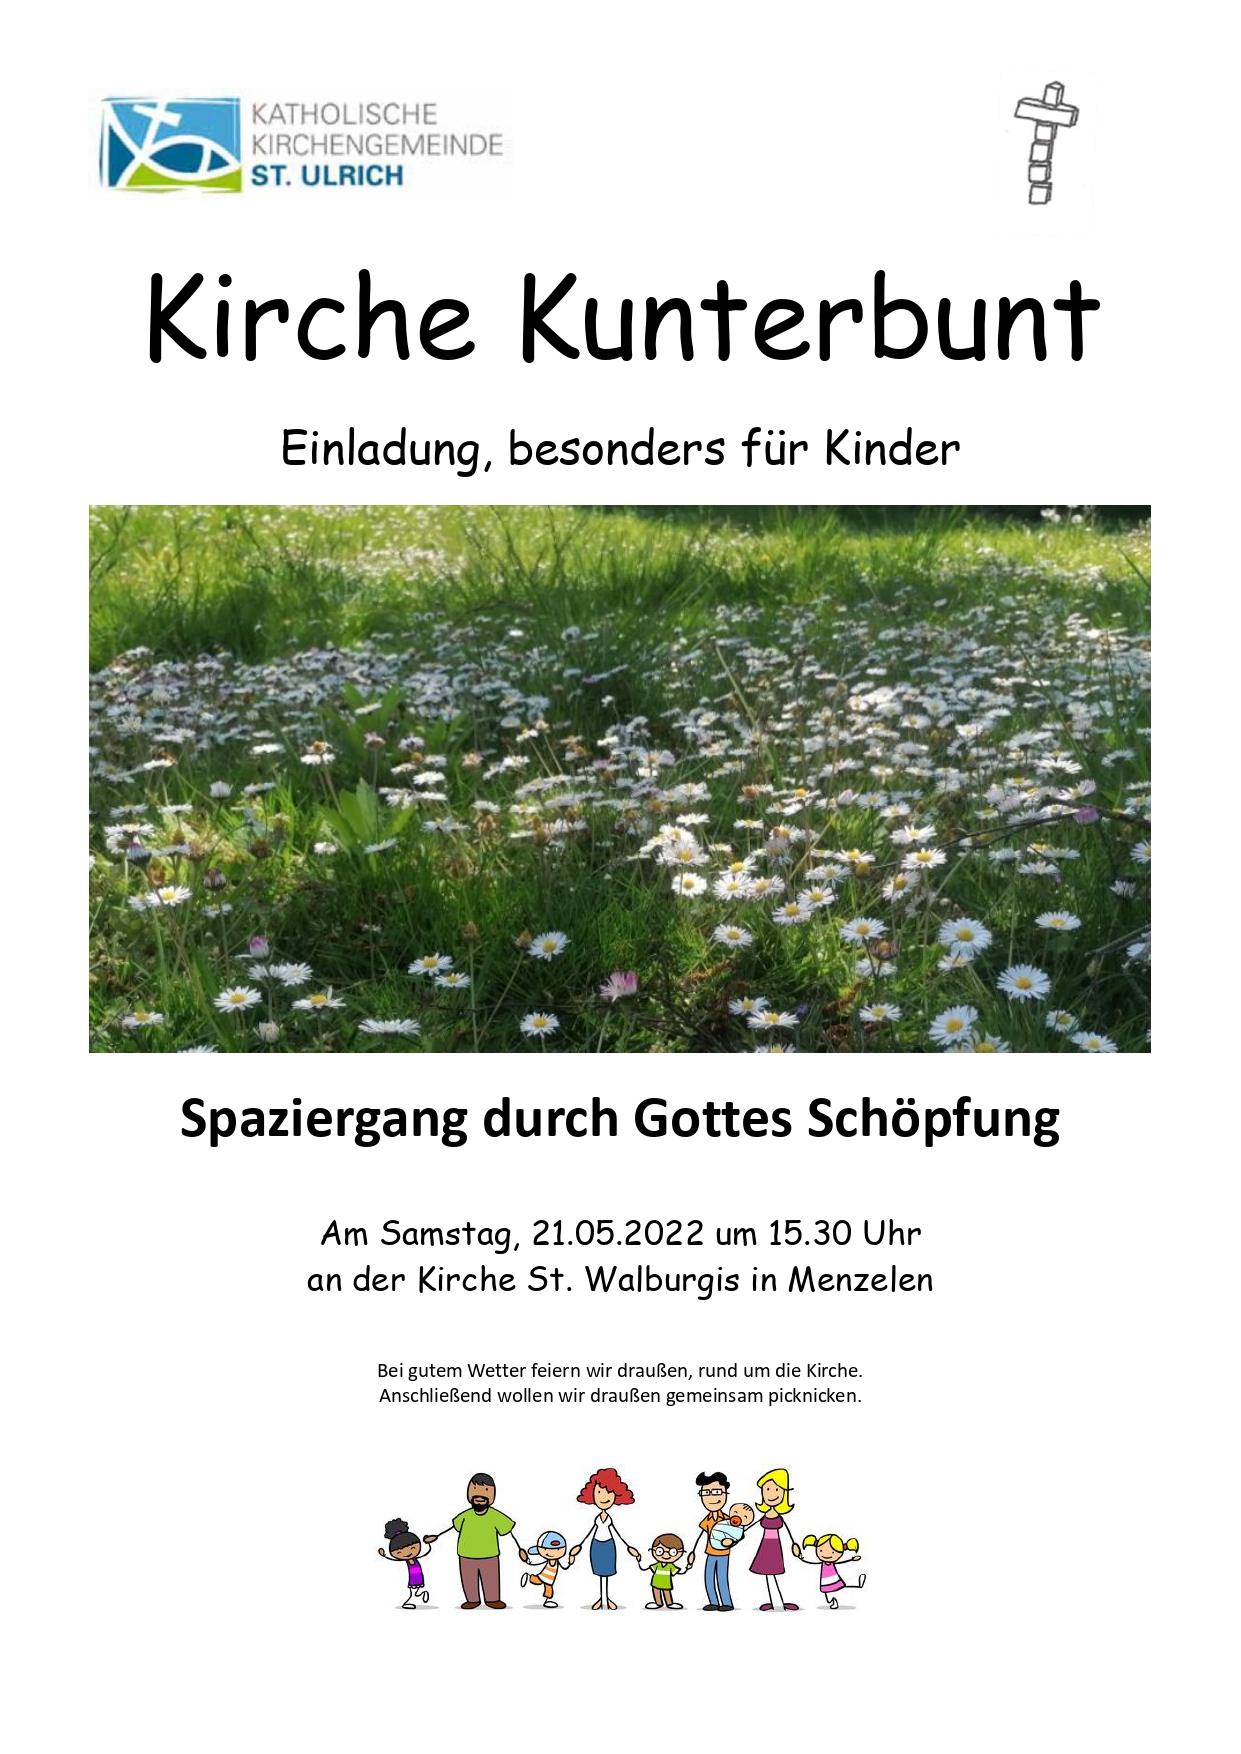 2022 05 15Plakat Schöpfung pages to jpg 0001